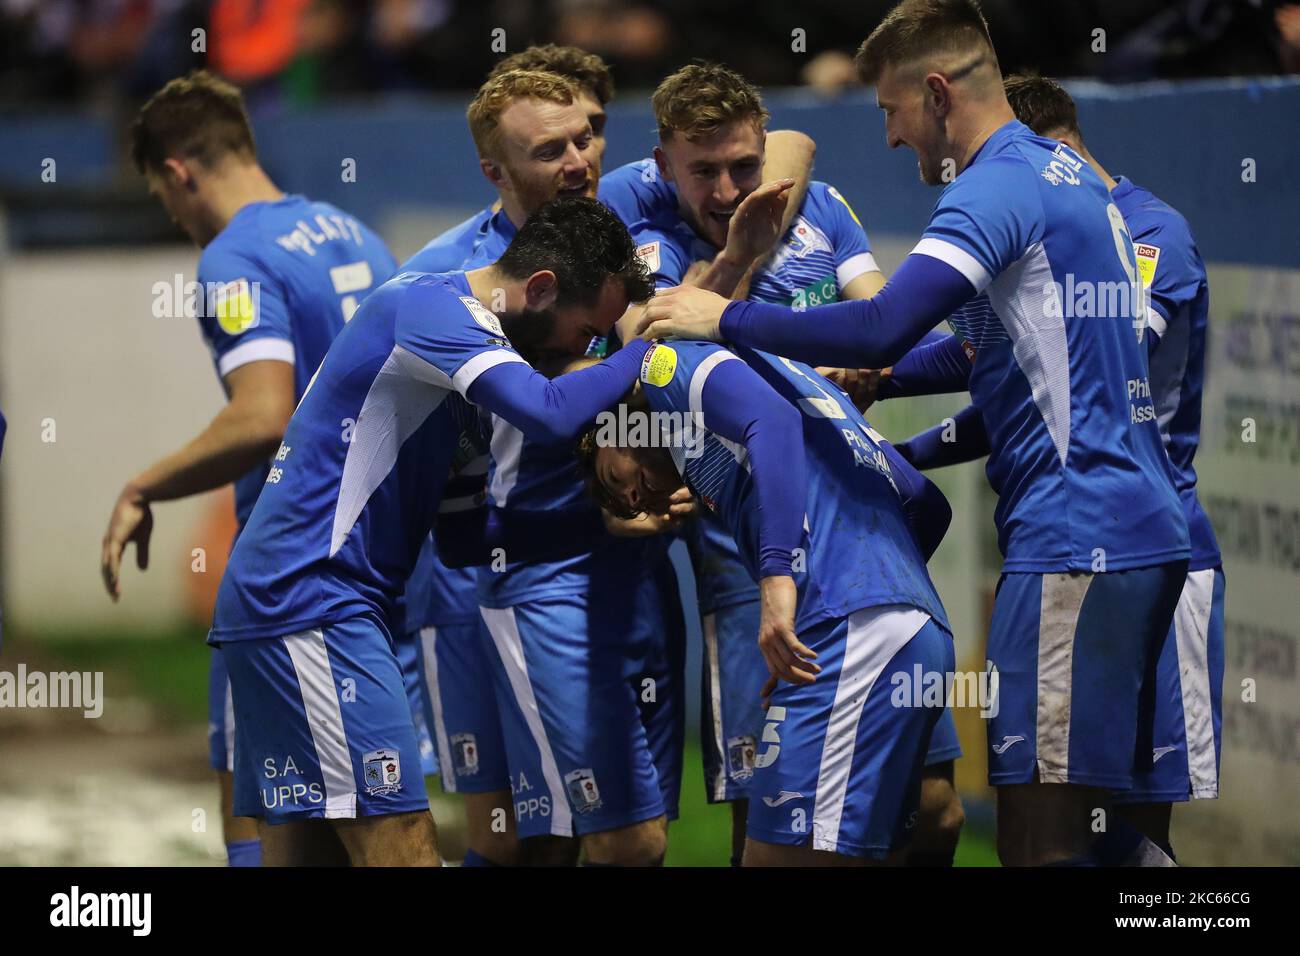 Barrow's Luke James celebrates with his team mates after scoring their second goal during the Sky Bet League 2 match between Barrow and Cheltenham Town at the Holker Street, Barrow-in-Furness on Saturday 19th December 2020. (Photo by Mark Fletcher/MI News/NurPhoto) Stock Photo